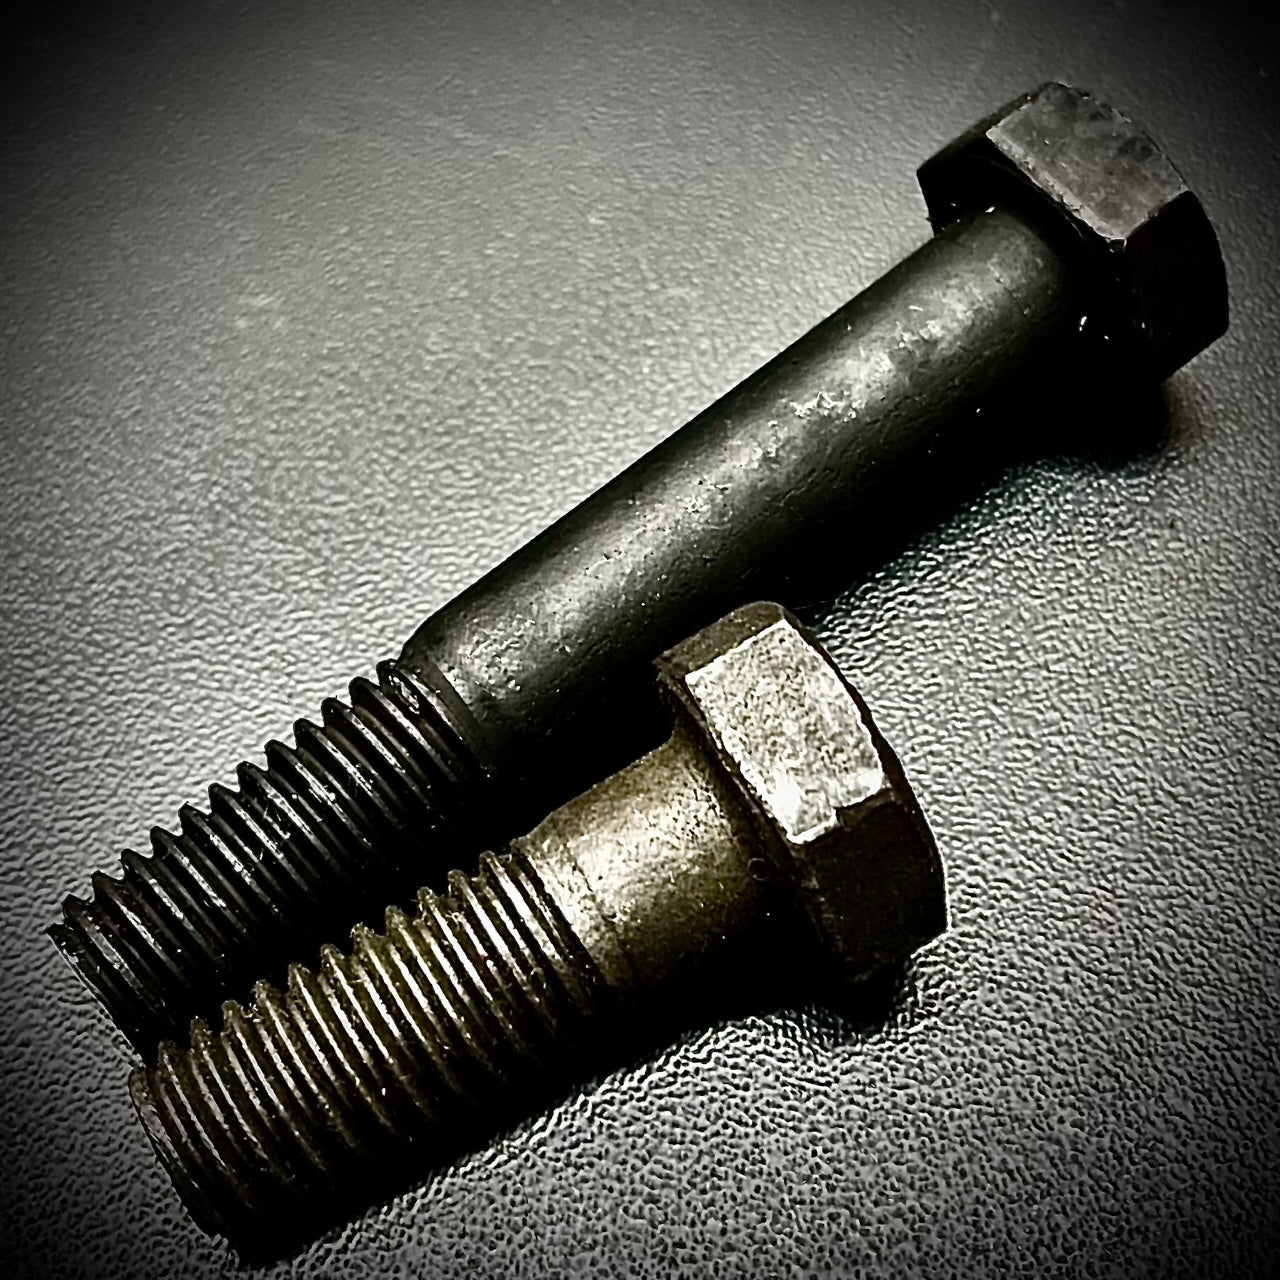 3/4" BSW Whitworth Hex Bolt High Tensile R/ 8.8 Self-Colour DIN933 - Fixaball Ltd. Fixings and Fasteners UK